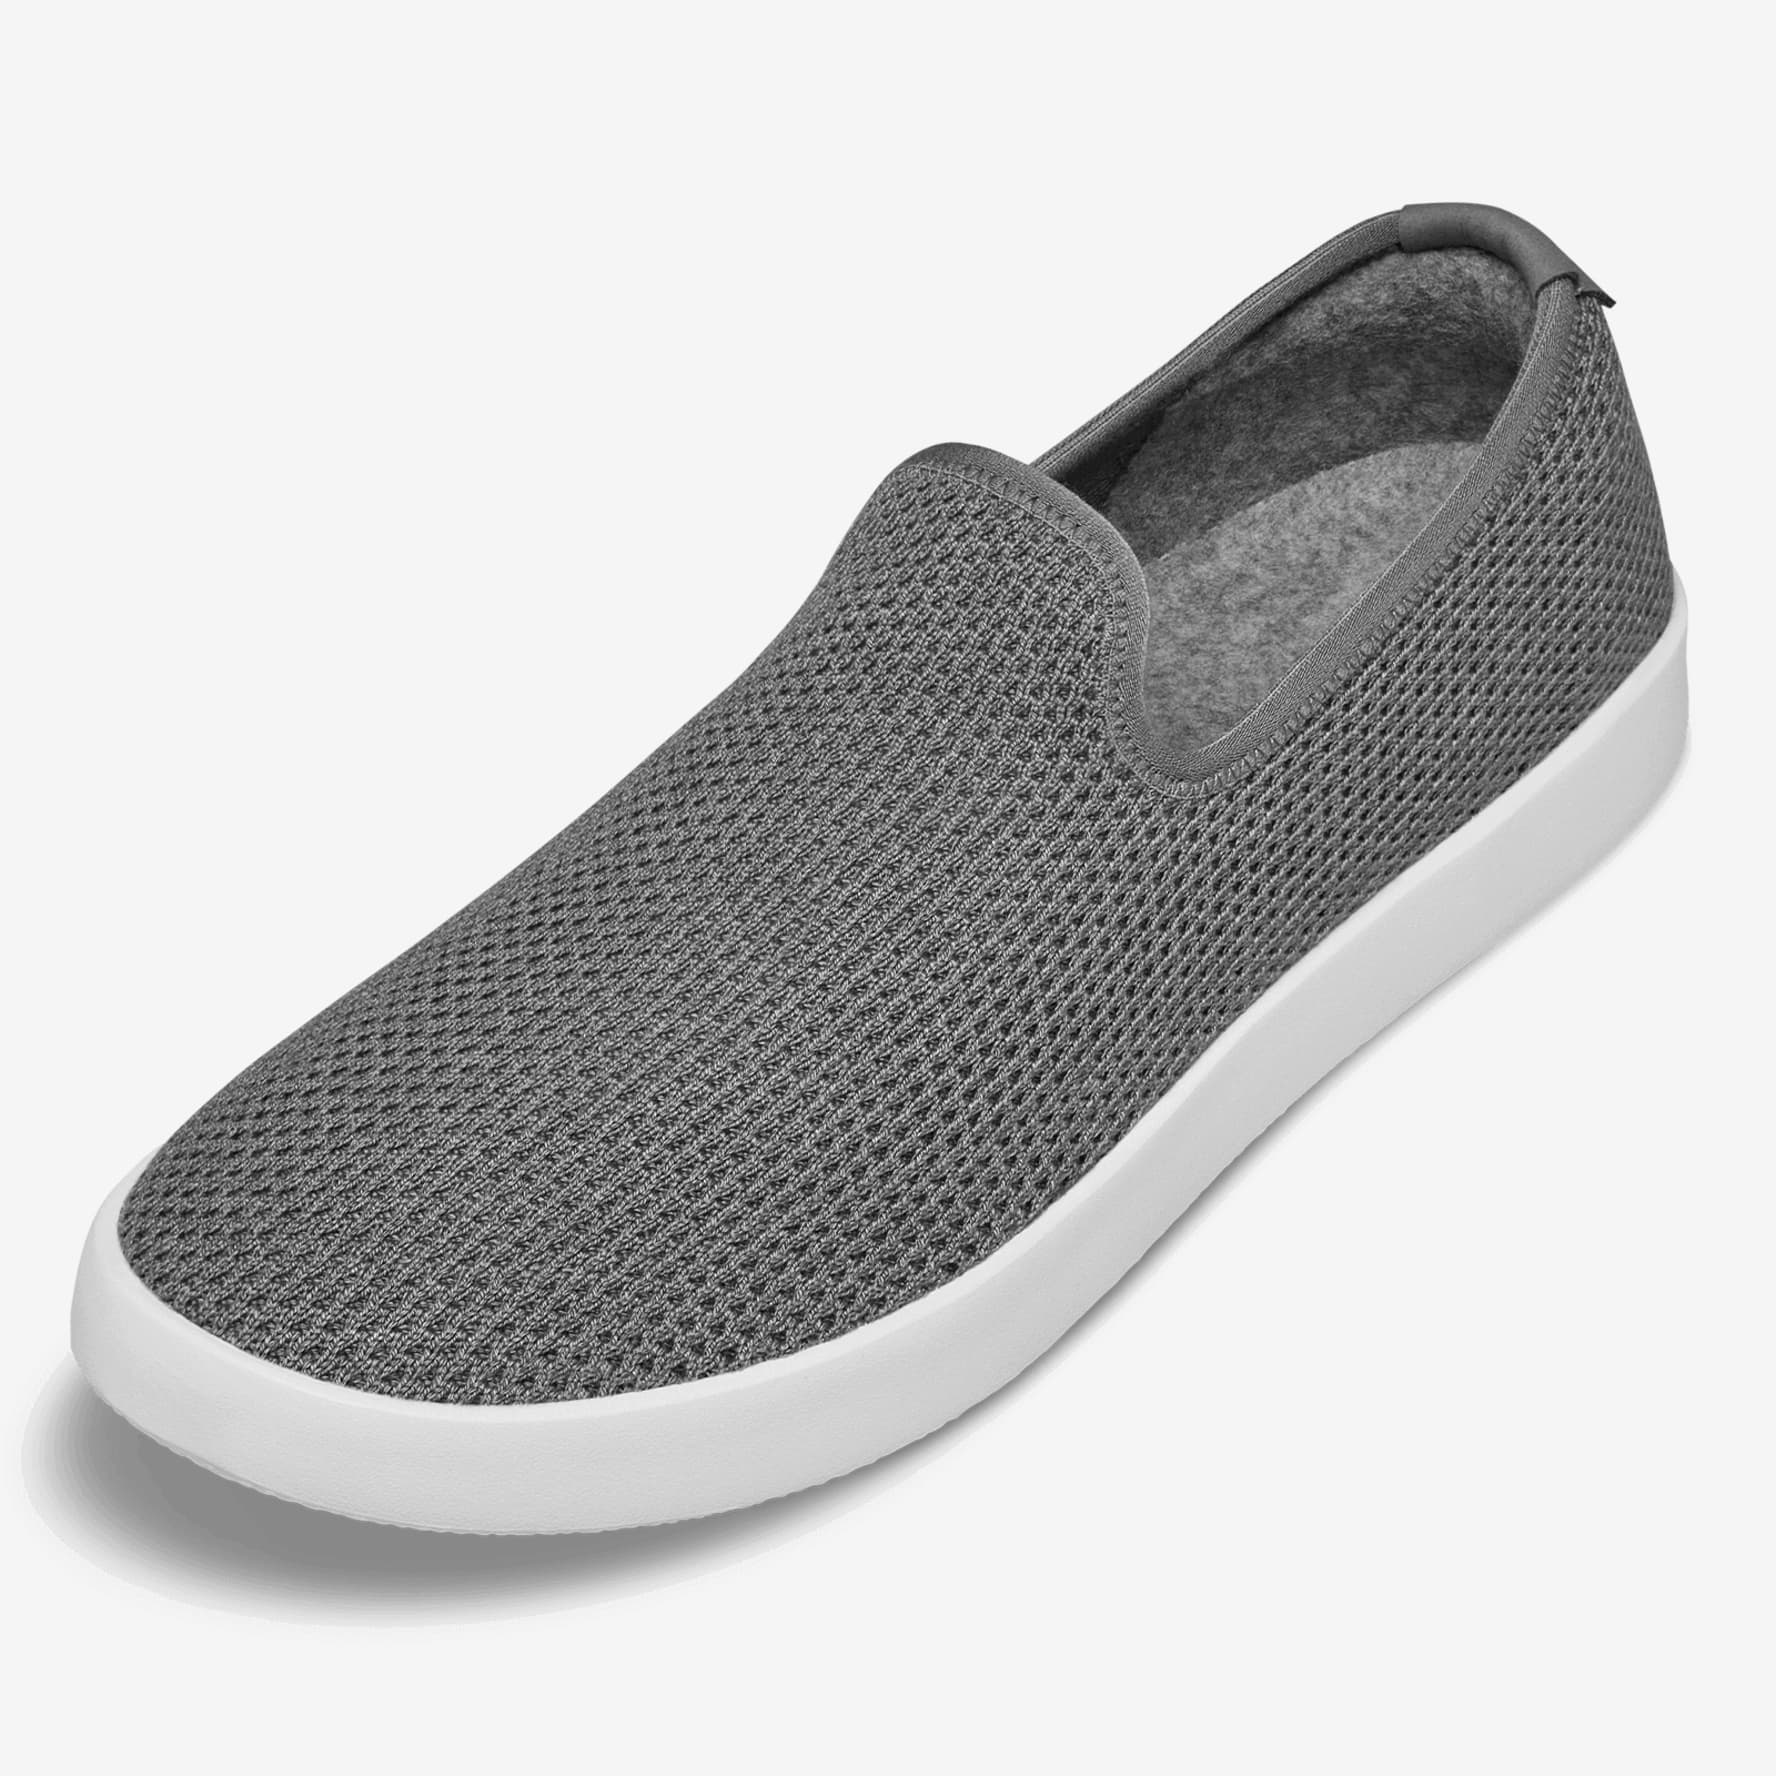 The Ultimate Slip-On, cont